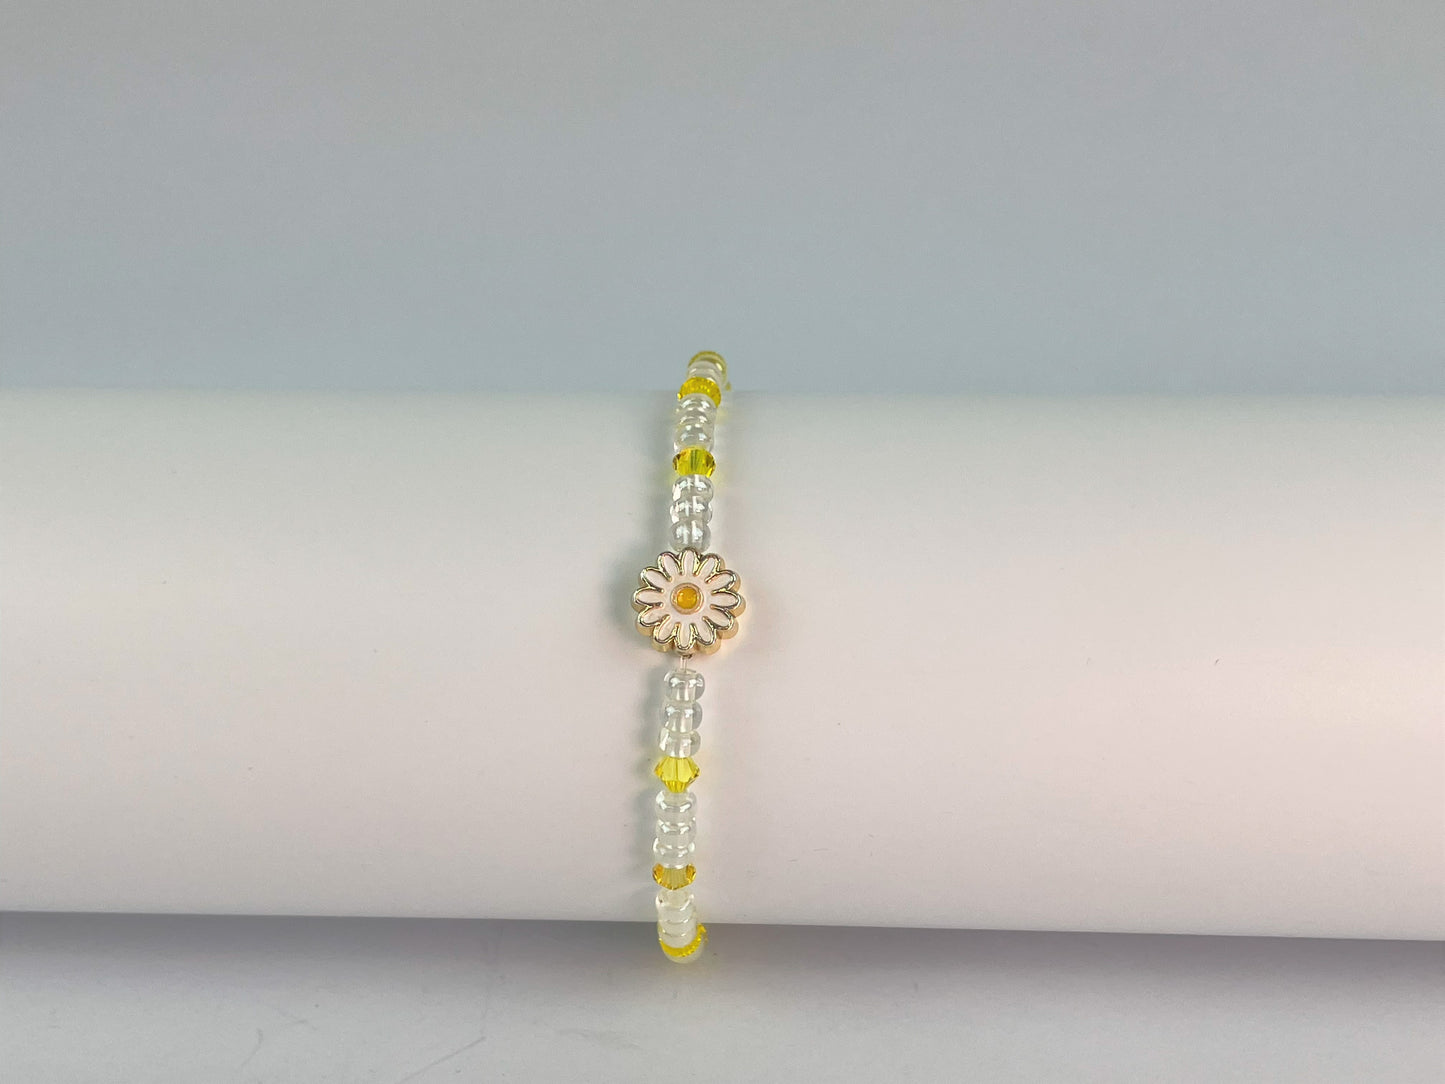 daisy elasticated bracelet clear glass and yellow crystals with centre daisy charm